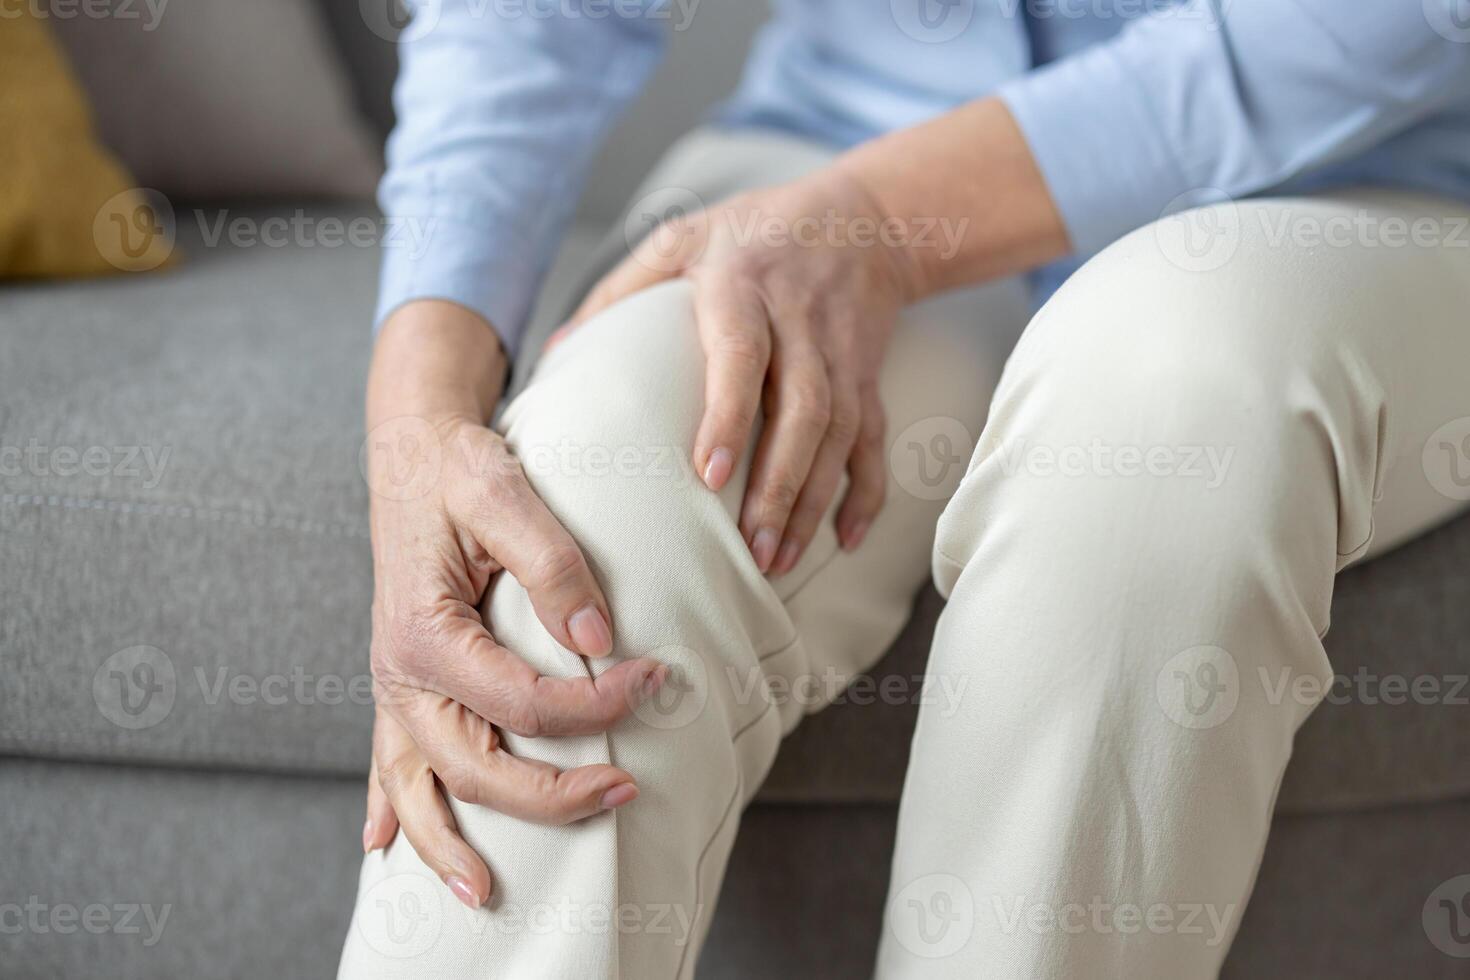 Senior woman sits in a living room, gently holding her sore knee, depicting common age-related health issues and the need for elderly care. photo